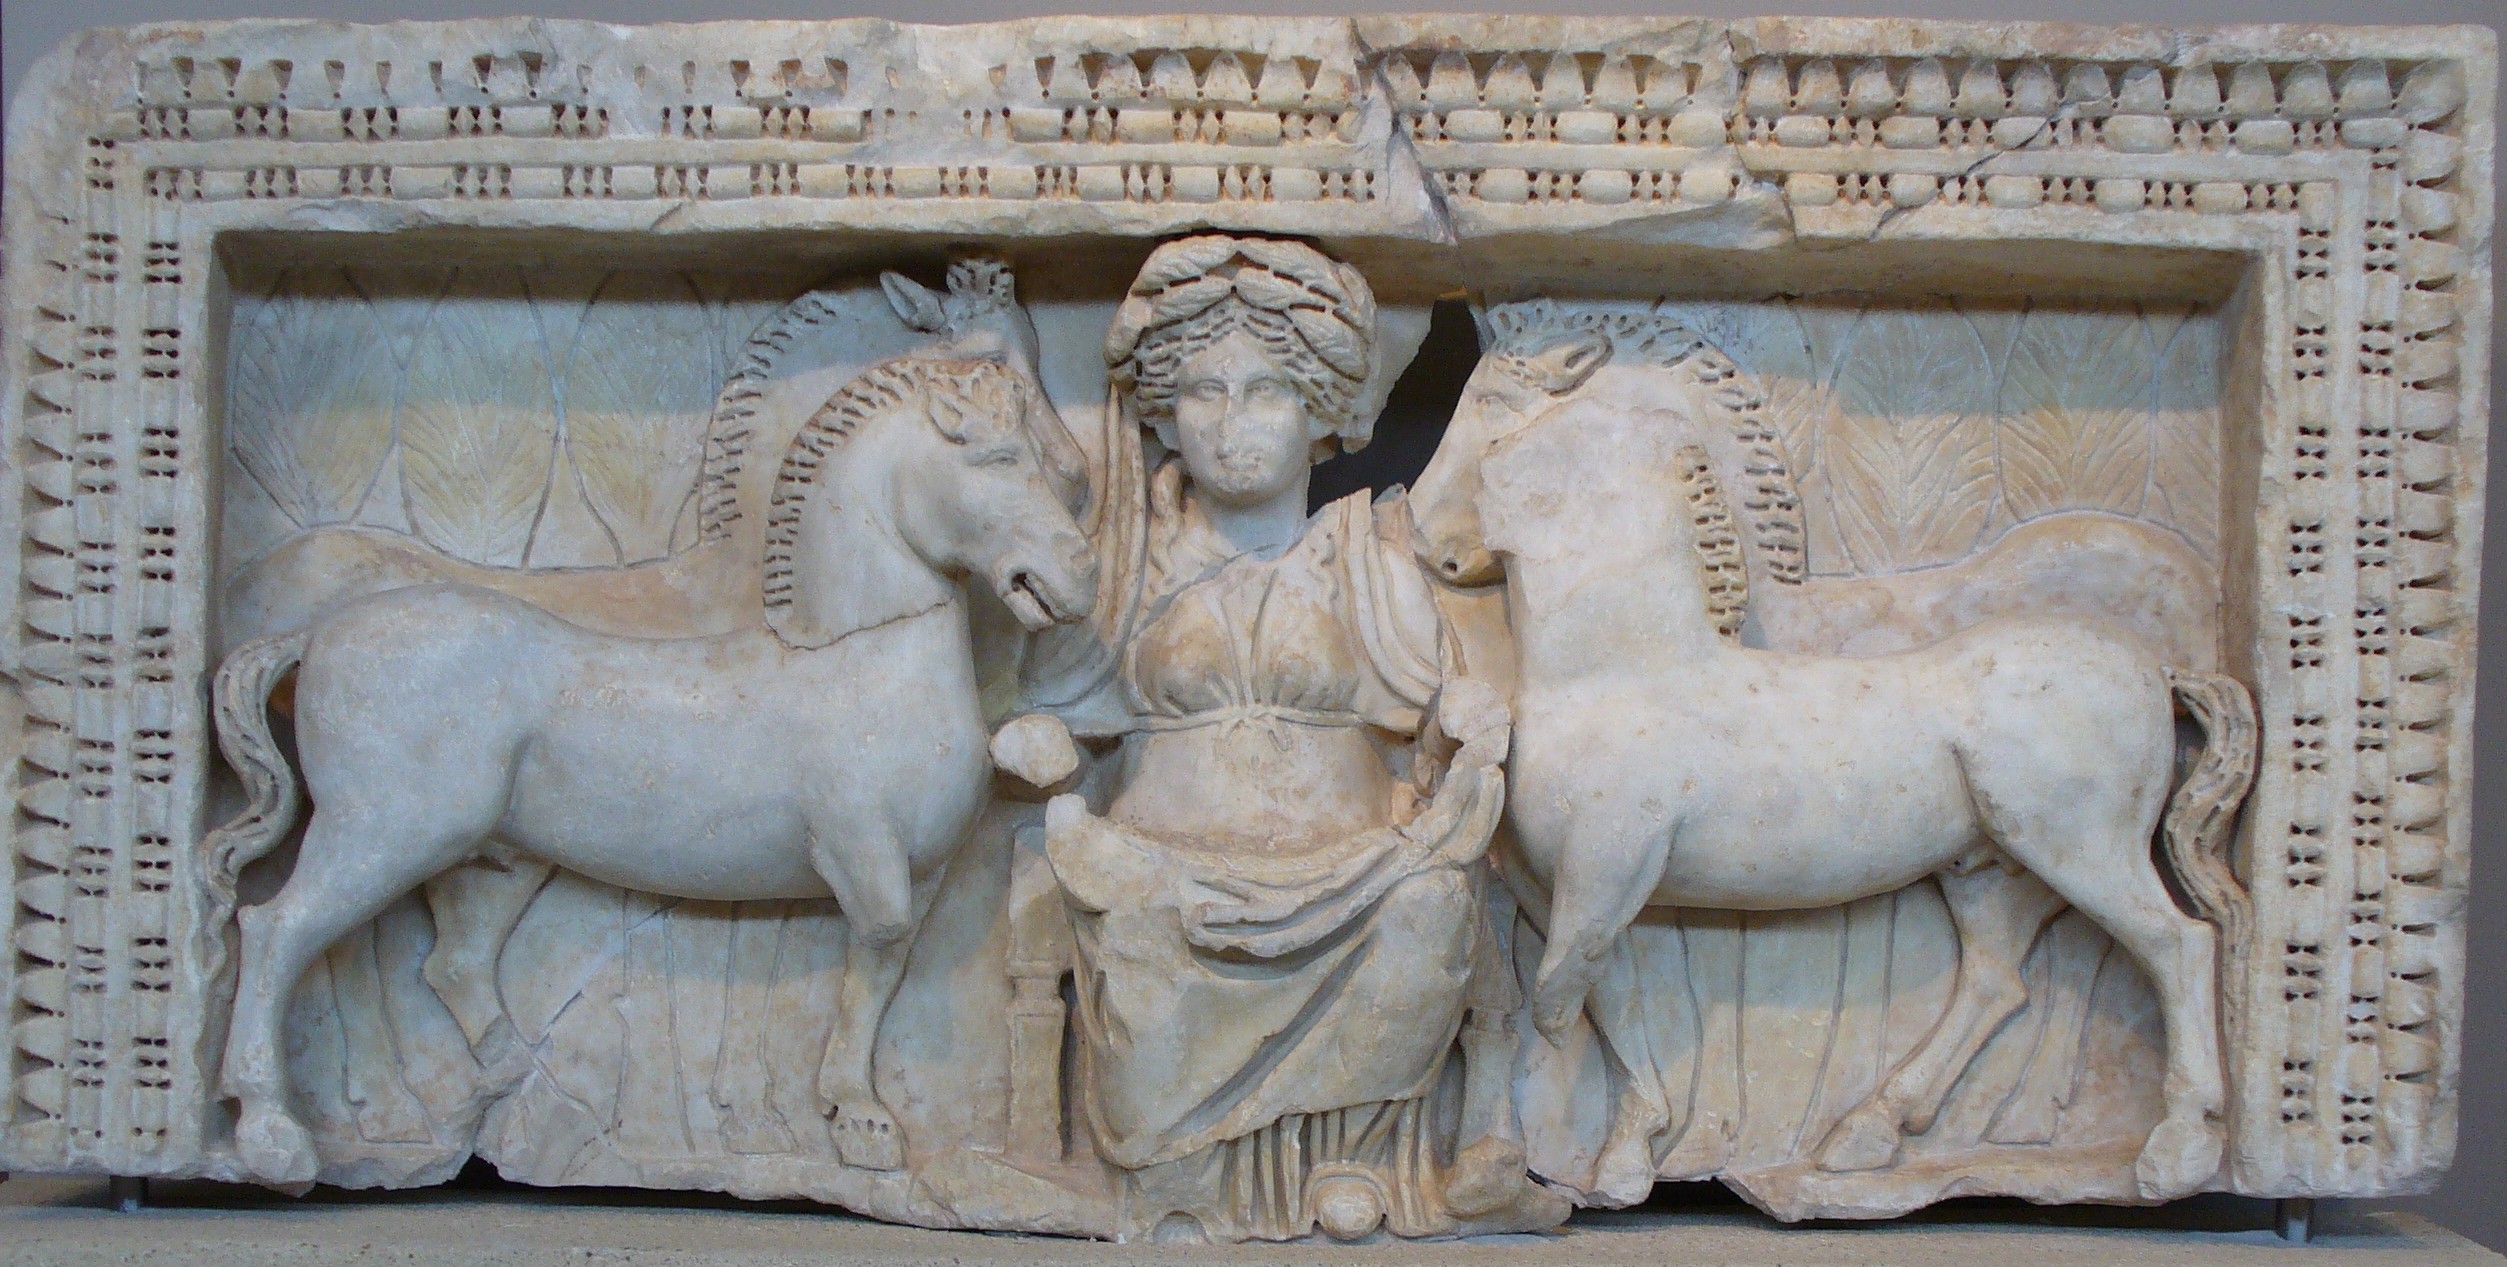 Relief sculpture of Epona framed by four horses, 4th century C.E., marble, 68.7 x 141 x 16 cm (Archaeological Museum, Thessaloniki; photo: QuartierLatin1968, CC BY-SA 3.0). Excavated in 1962 at Thessaloniki, Greece